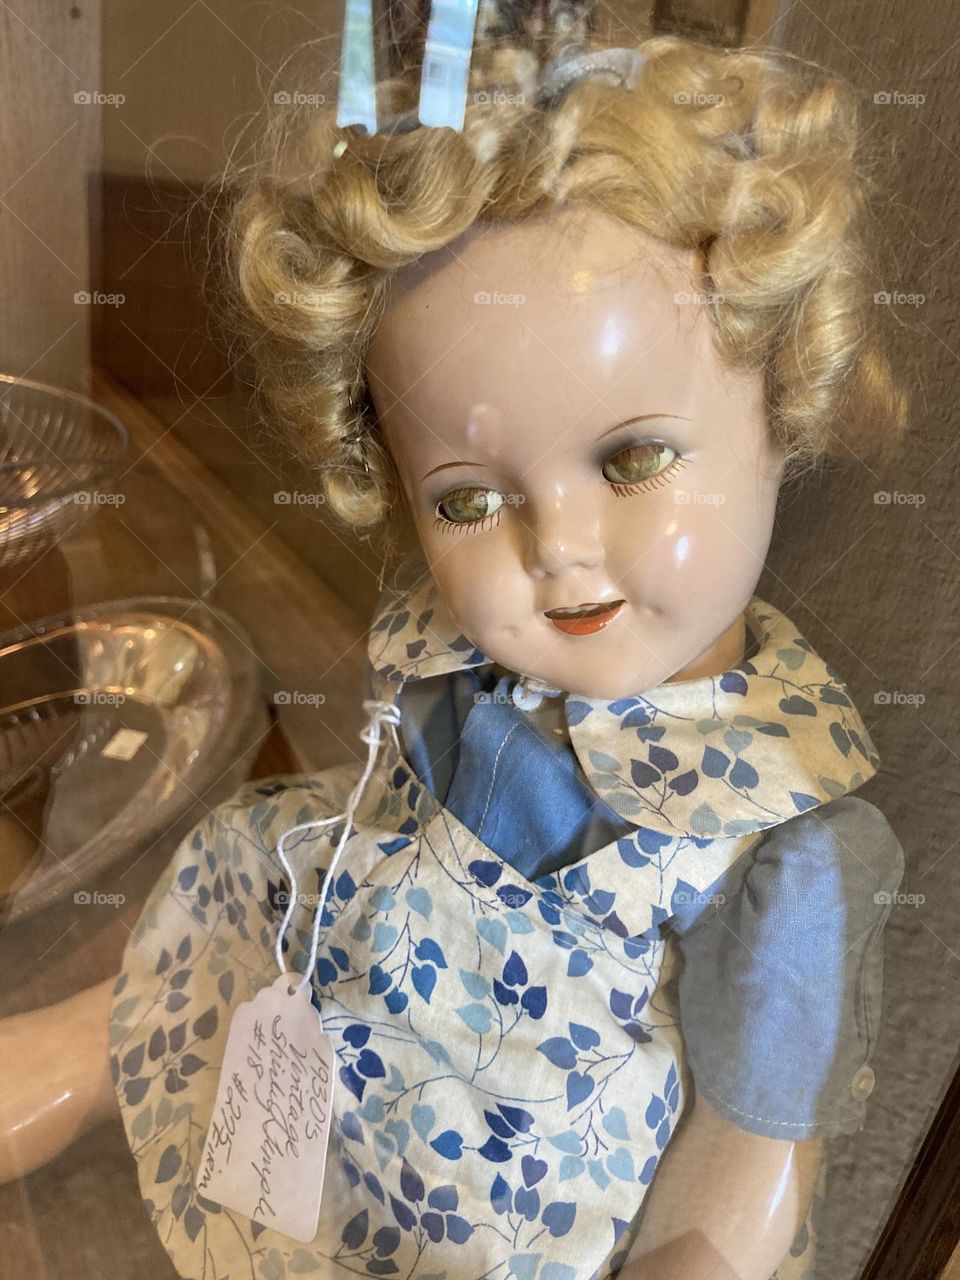 Antique Shirley Temple doll